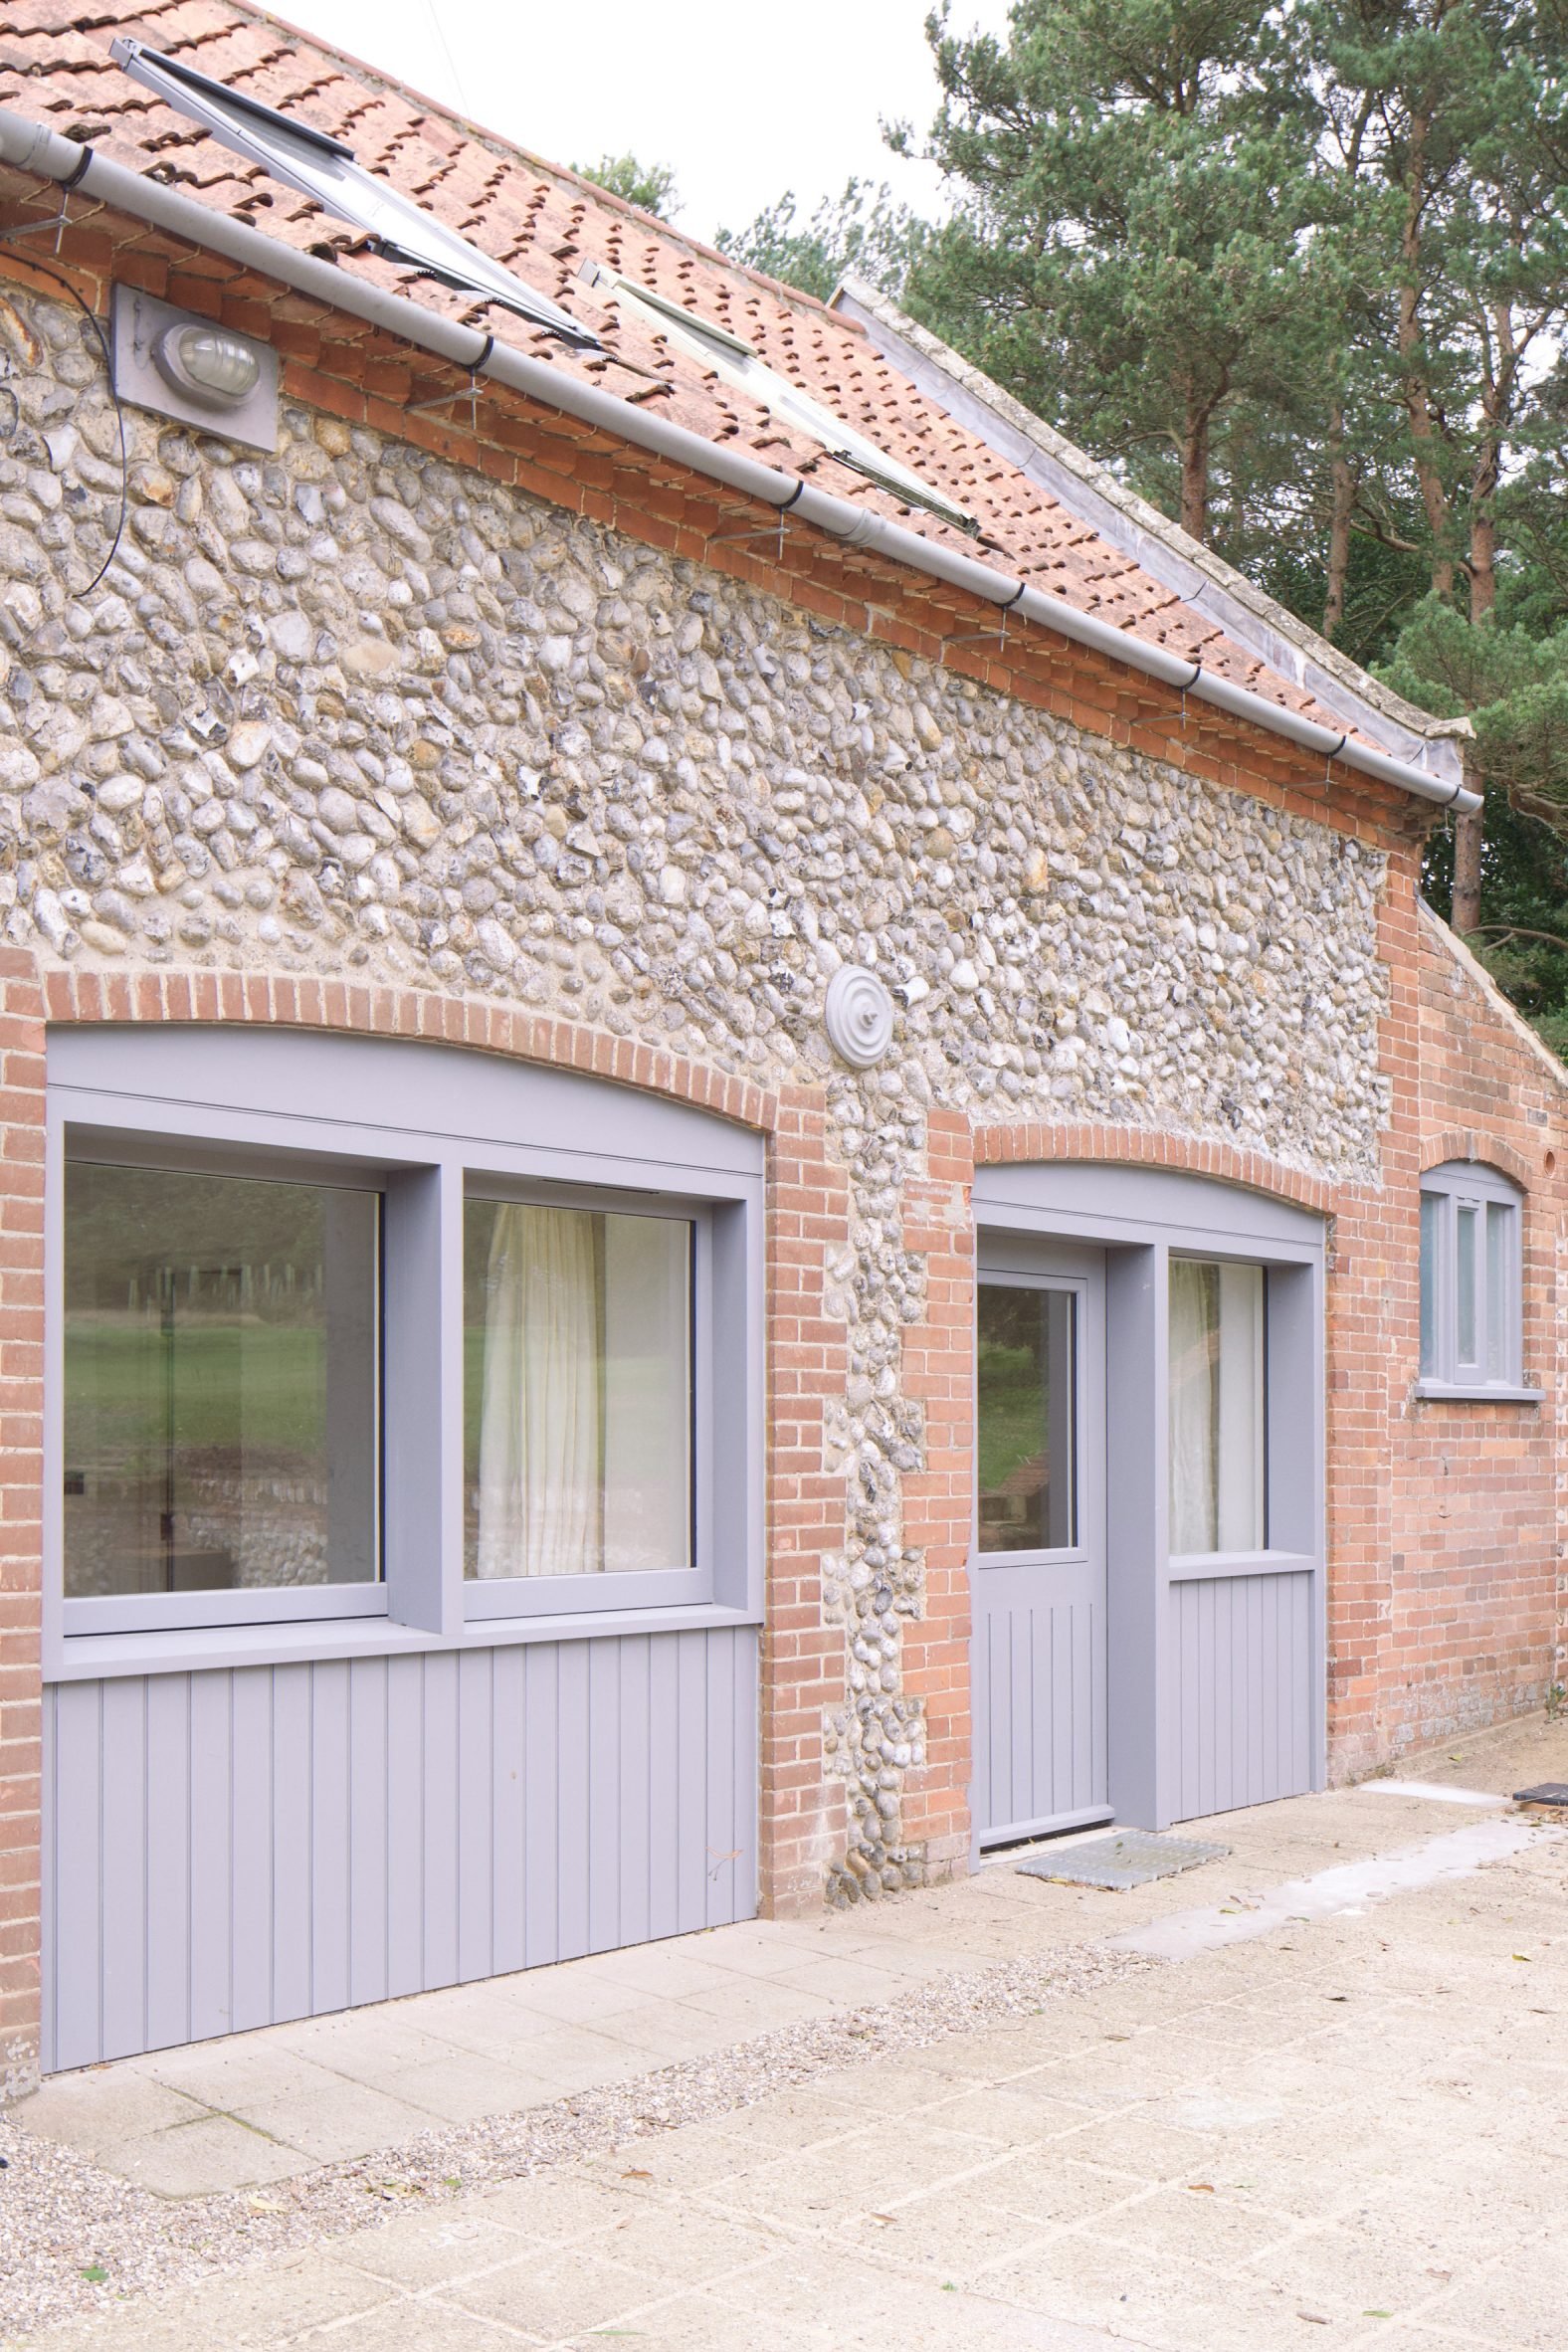 Converted stables in Norfolk